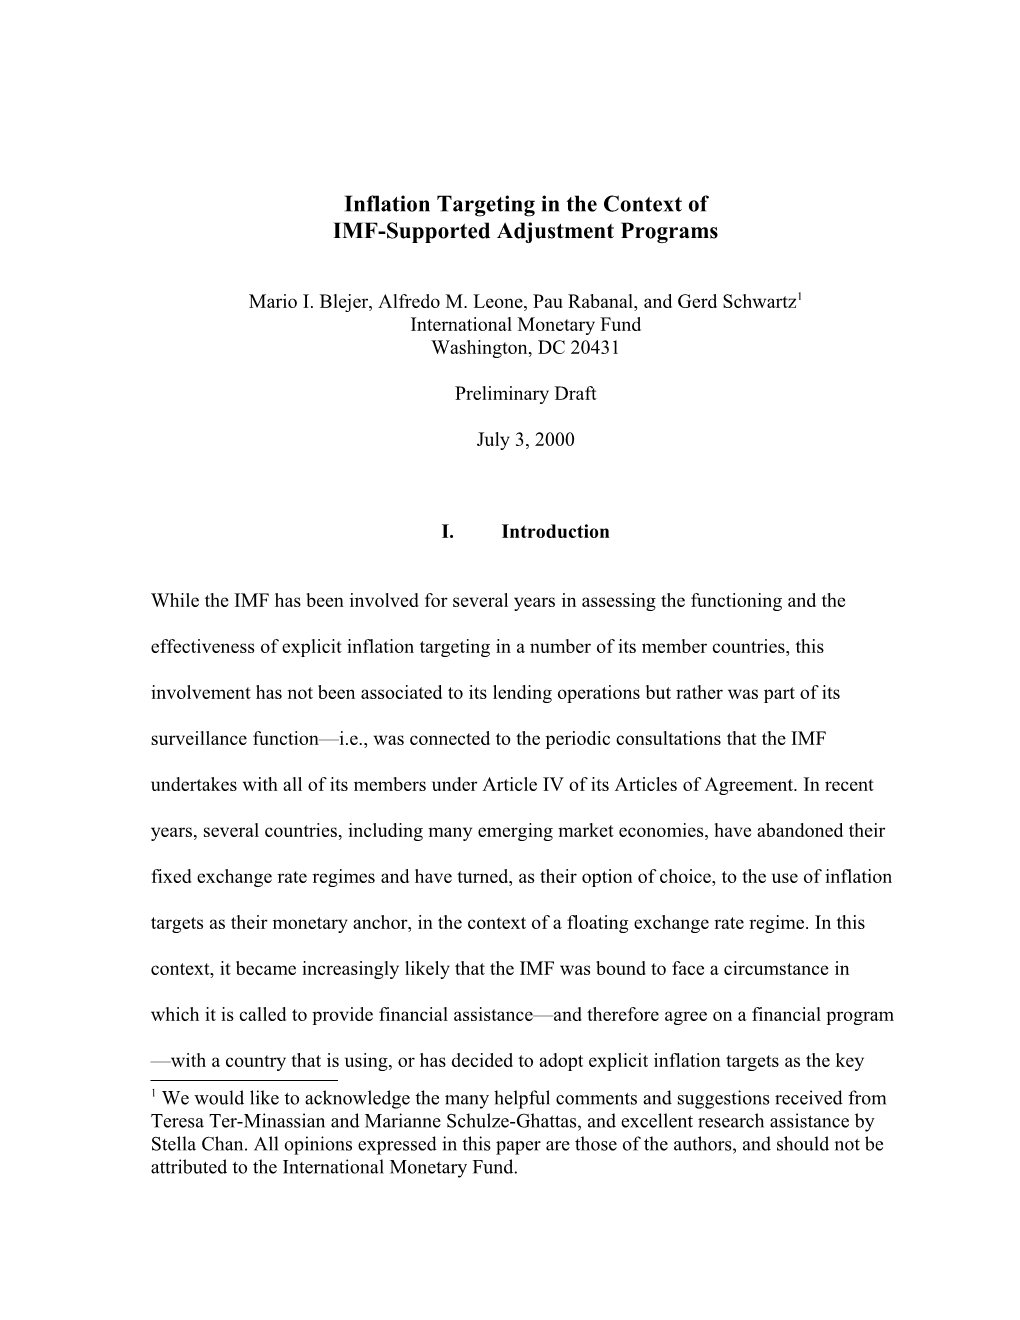 Brazil: Inflation Targeting and Monetary Policy Conditionality